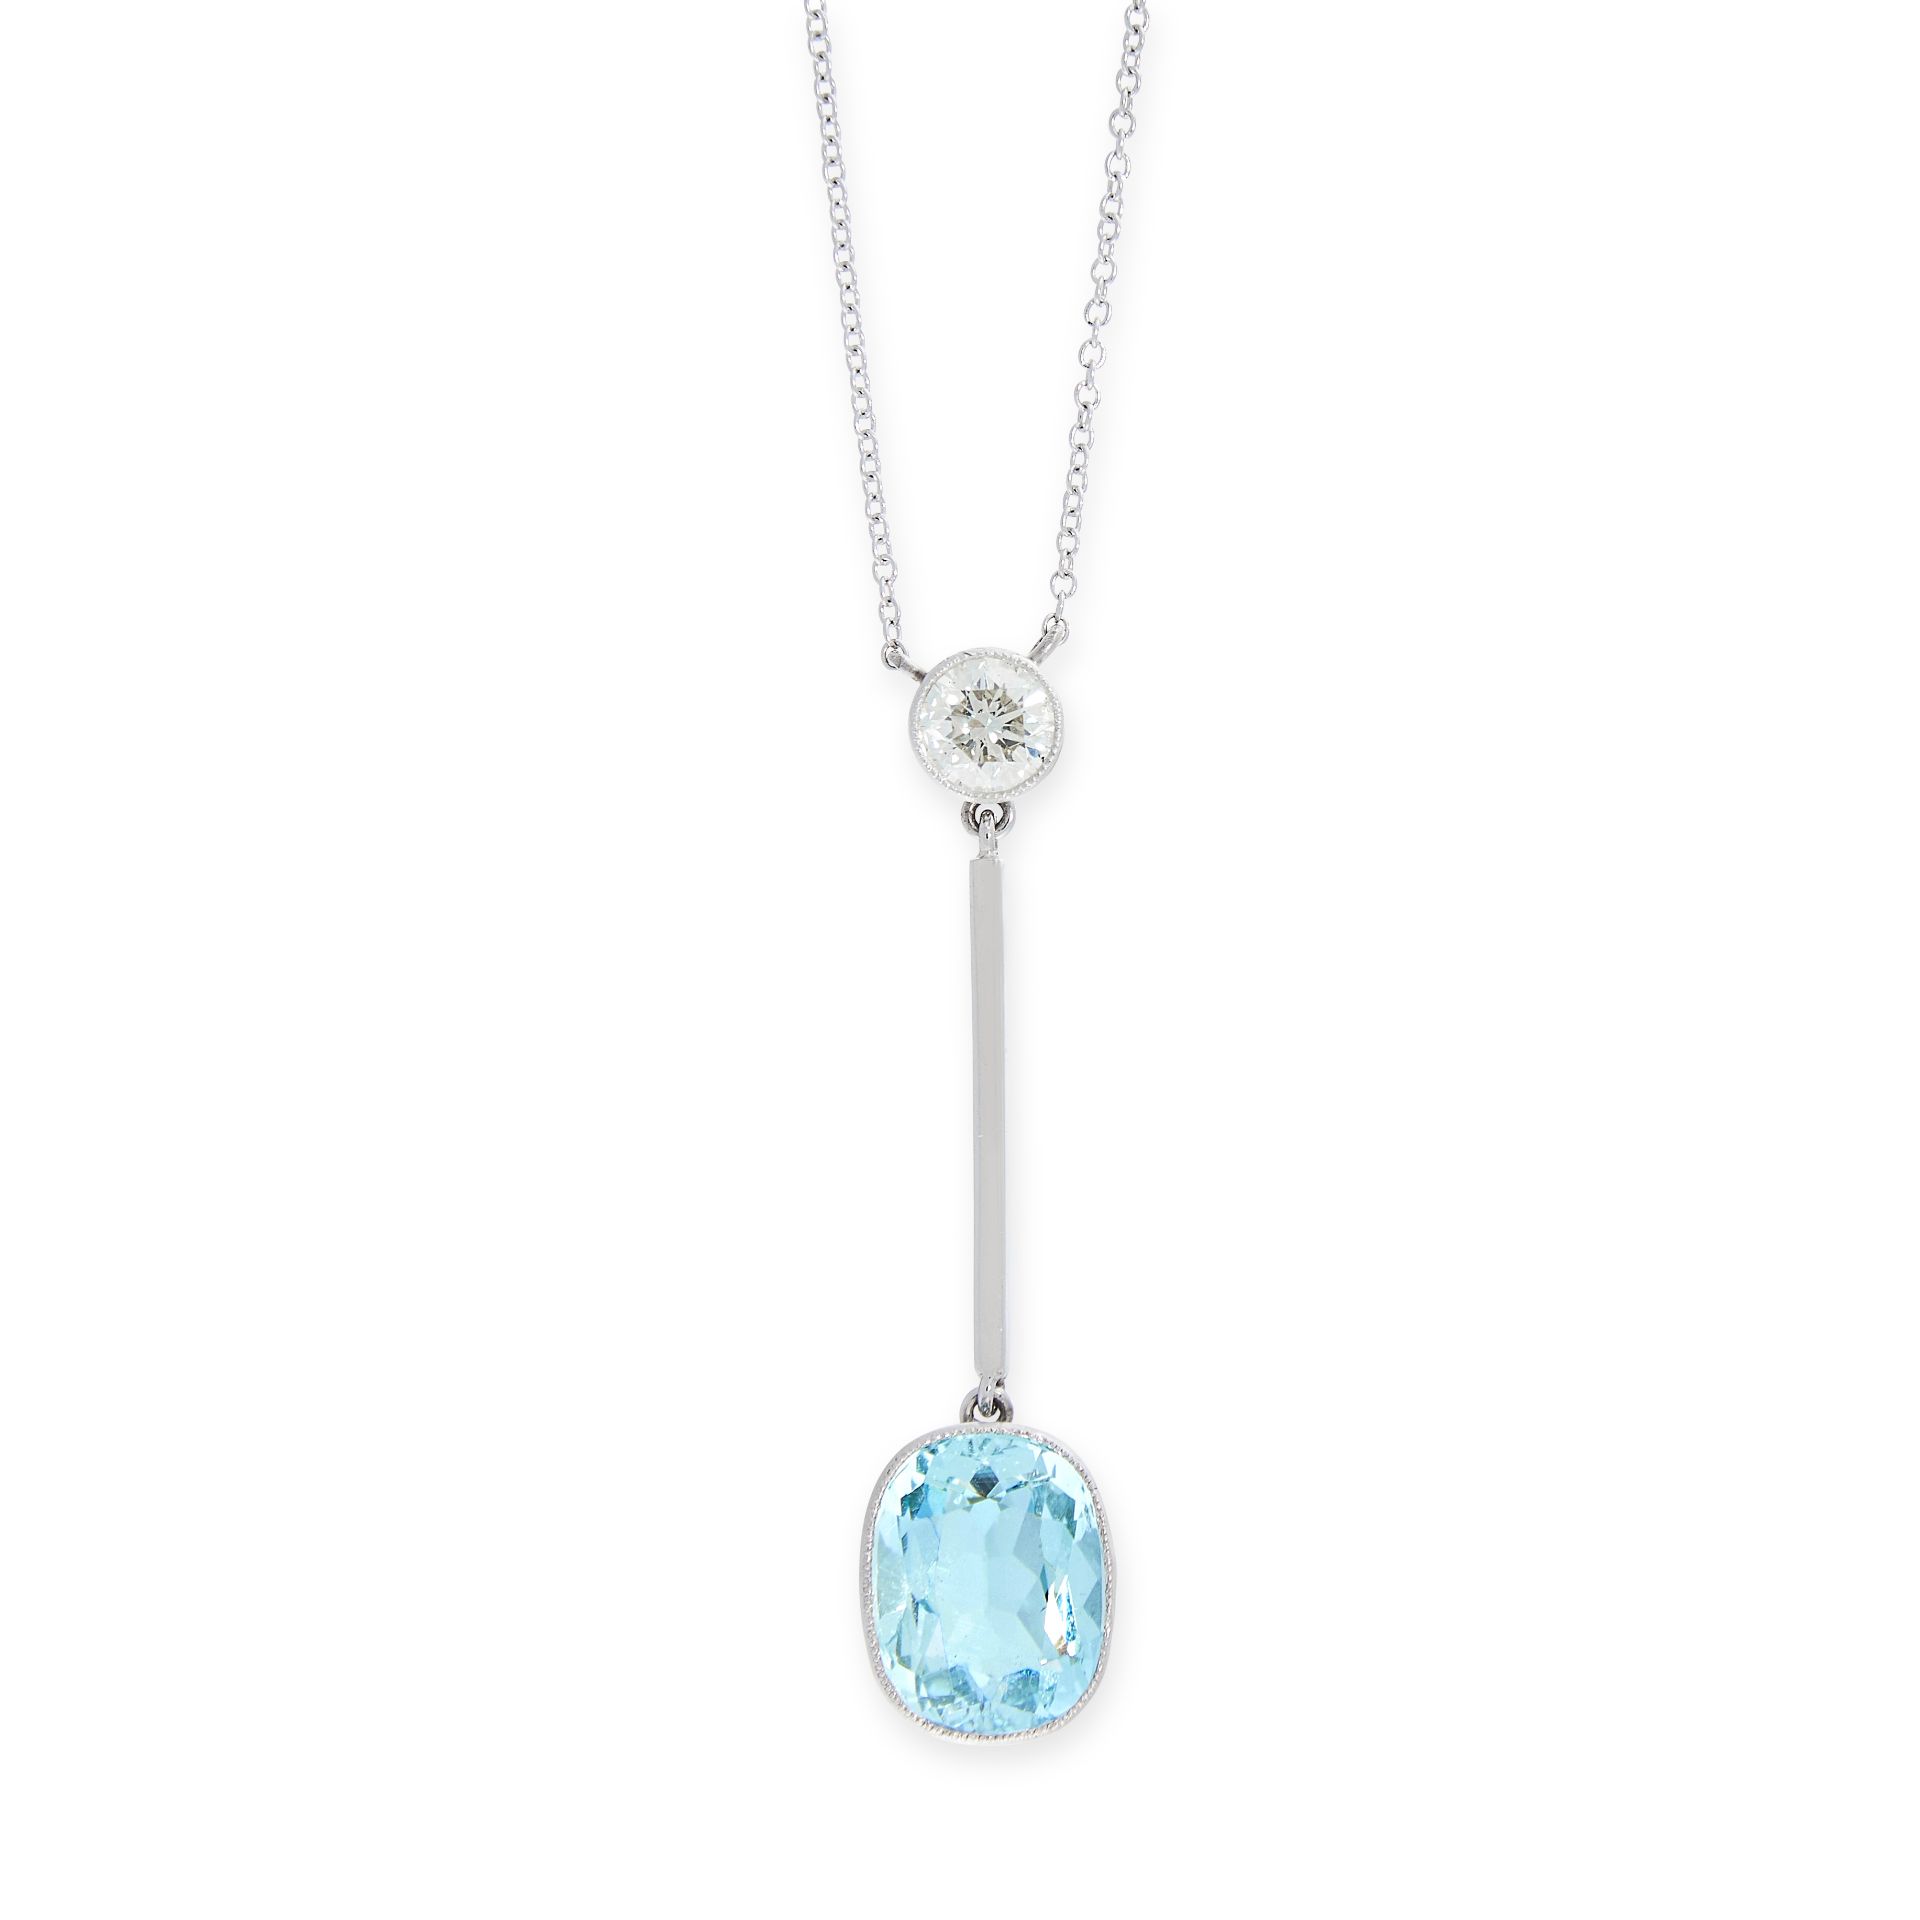 AN AQUAMARINE AND DIAMOND PENDANT NECKLACE in 18ct white gold, the pendant set with a round brill...